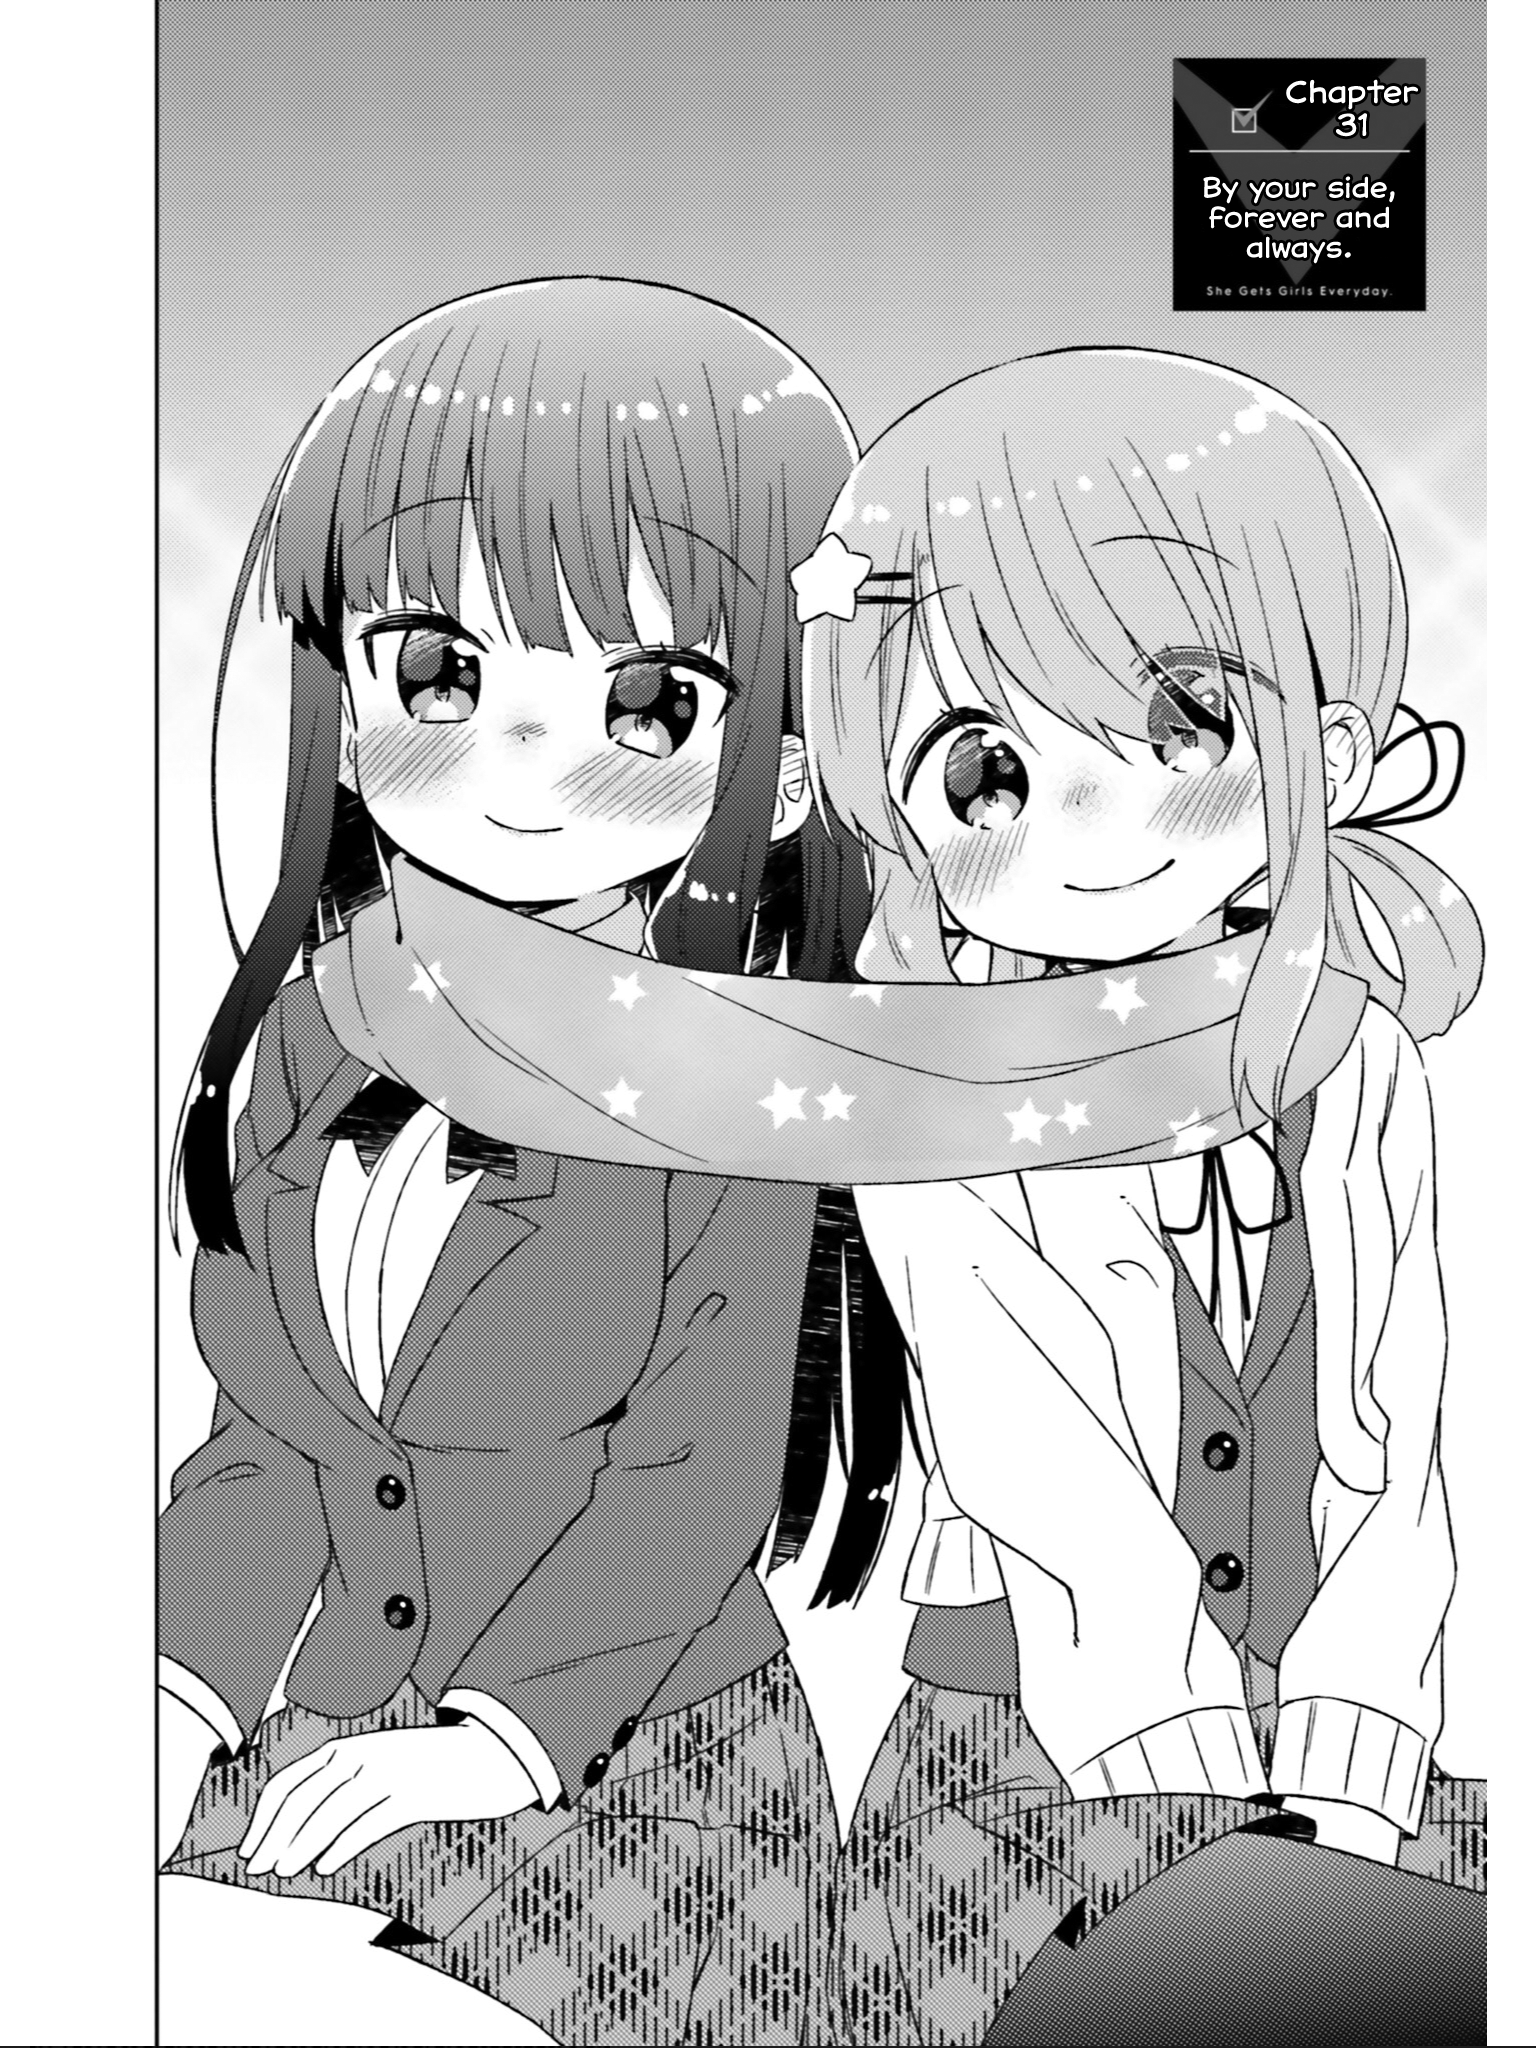 She Gets Girls Every Day. Vol.5 Chapter 31: By Your Side, Forever And Always - Picture 3